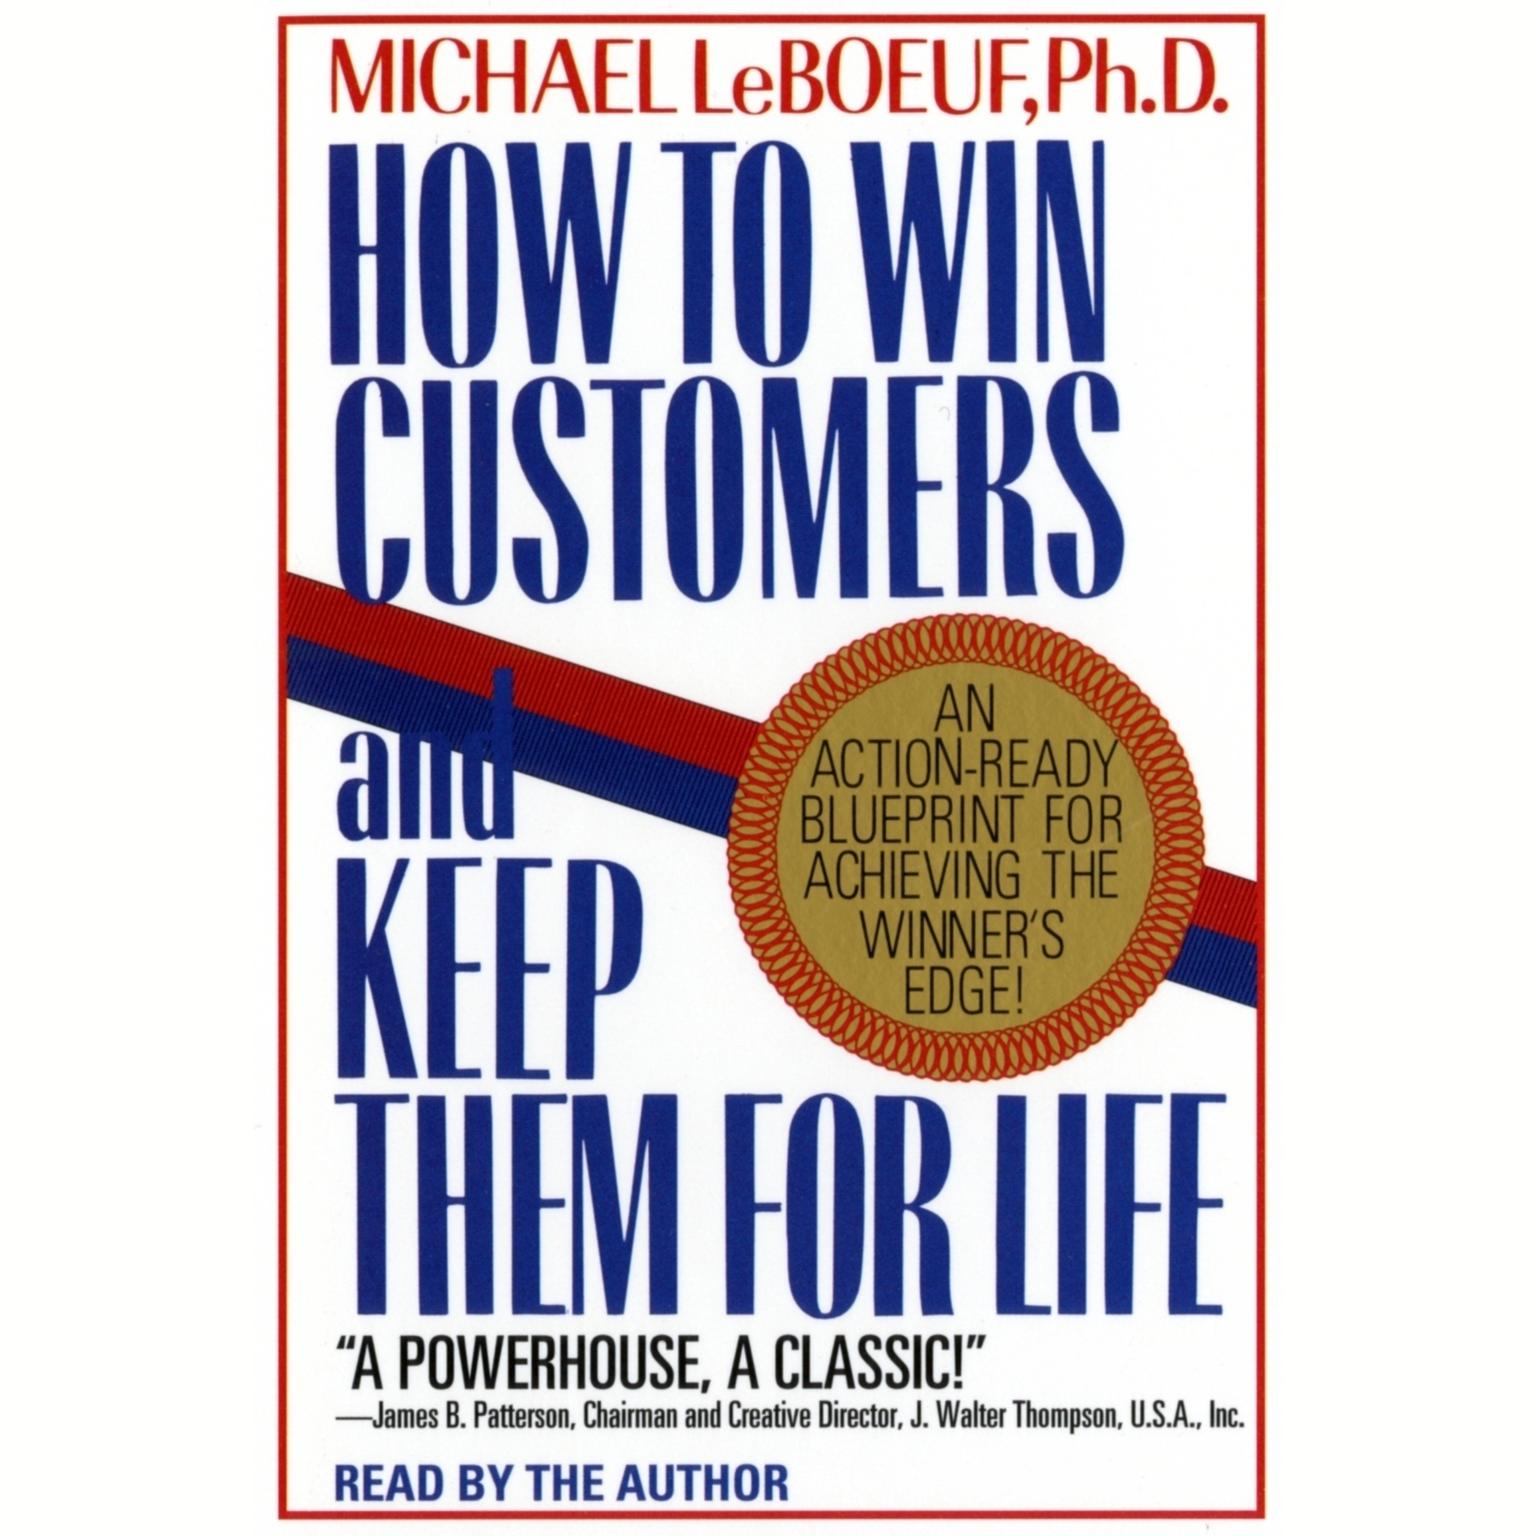 How To Win Customers And Keep Them For Life (Abridged): An Action-Ready Blueprint for Achieving the Winners Edge! Audiobook, by Michael LeBoeuf